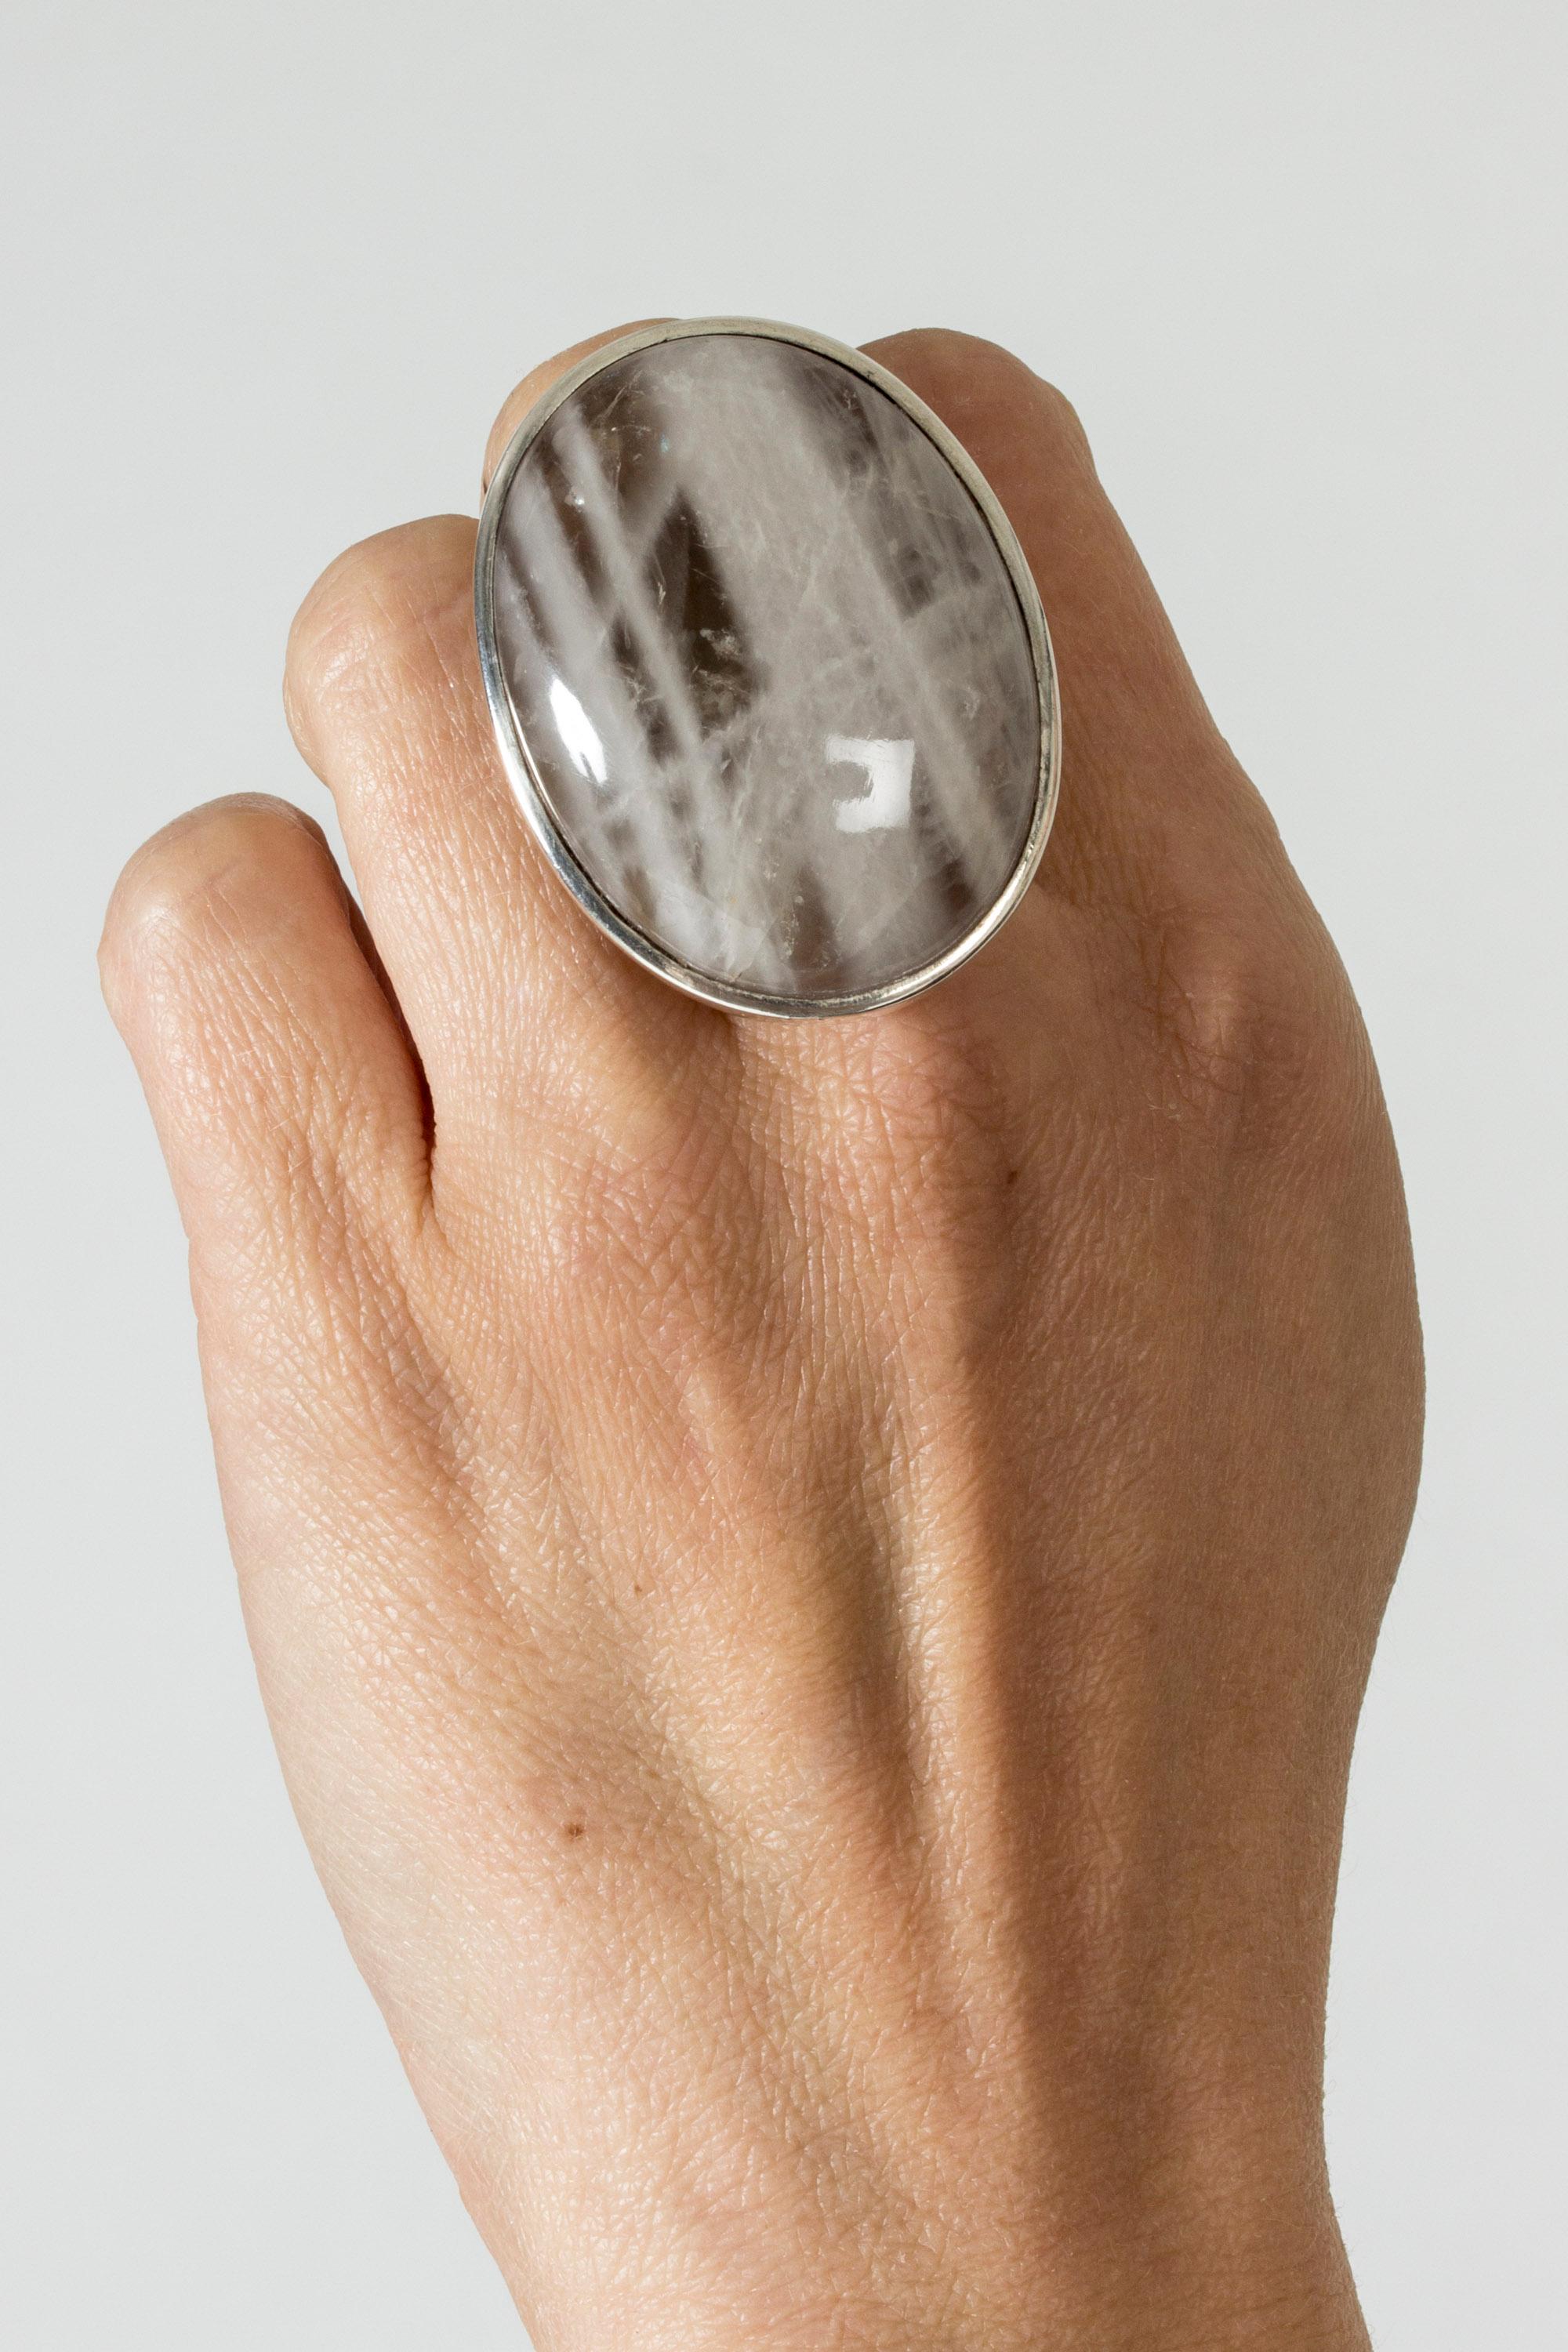 Amazing, oversized silver ring from Kaunis Koru, with a large grey agate stone. Imposing yet clean design with crisp silver elegantly framing the oval stone. Weighty feel.